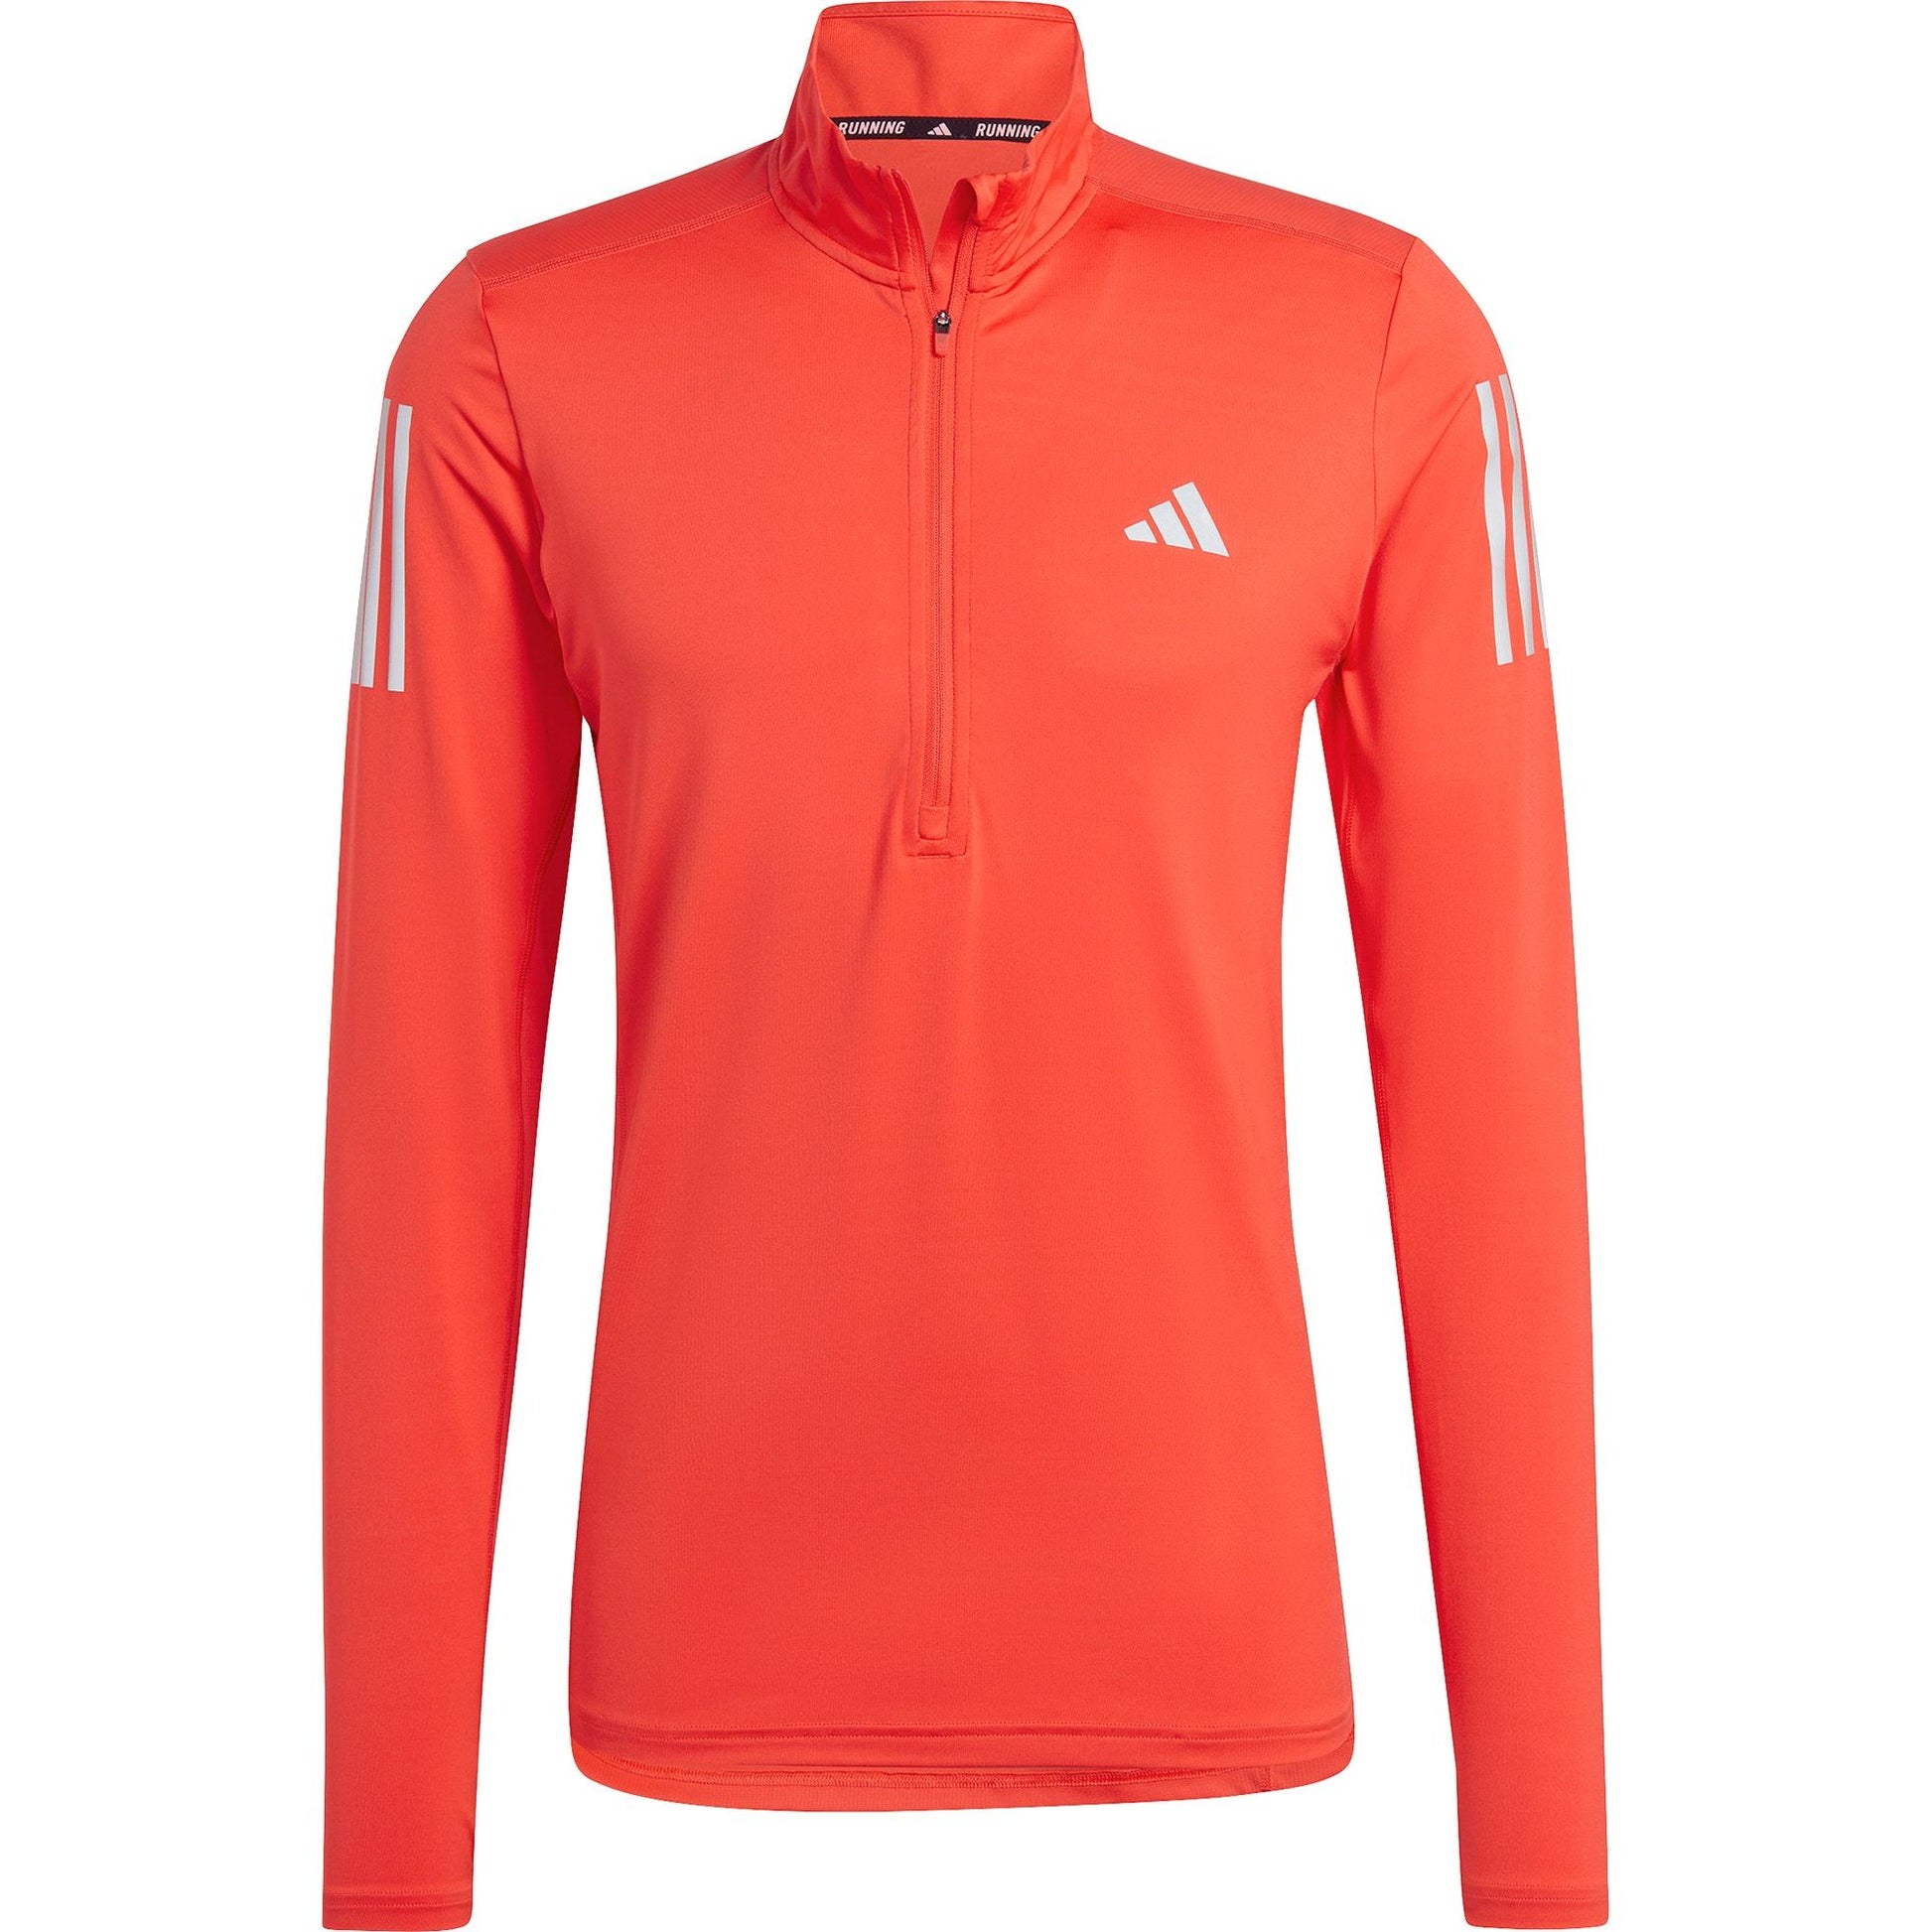 Adidas Own The Run Half Zip Long Sleeve Ik9565 Front - Front View